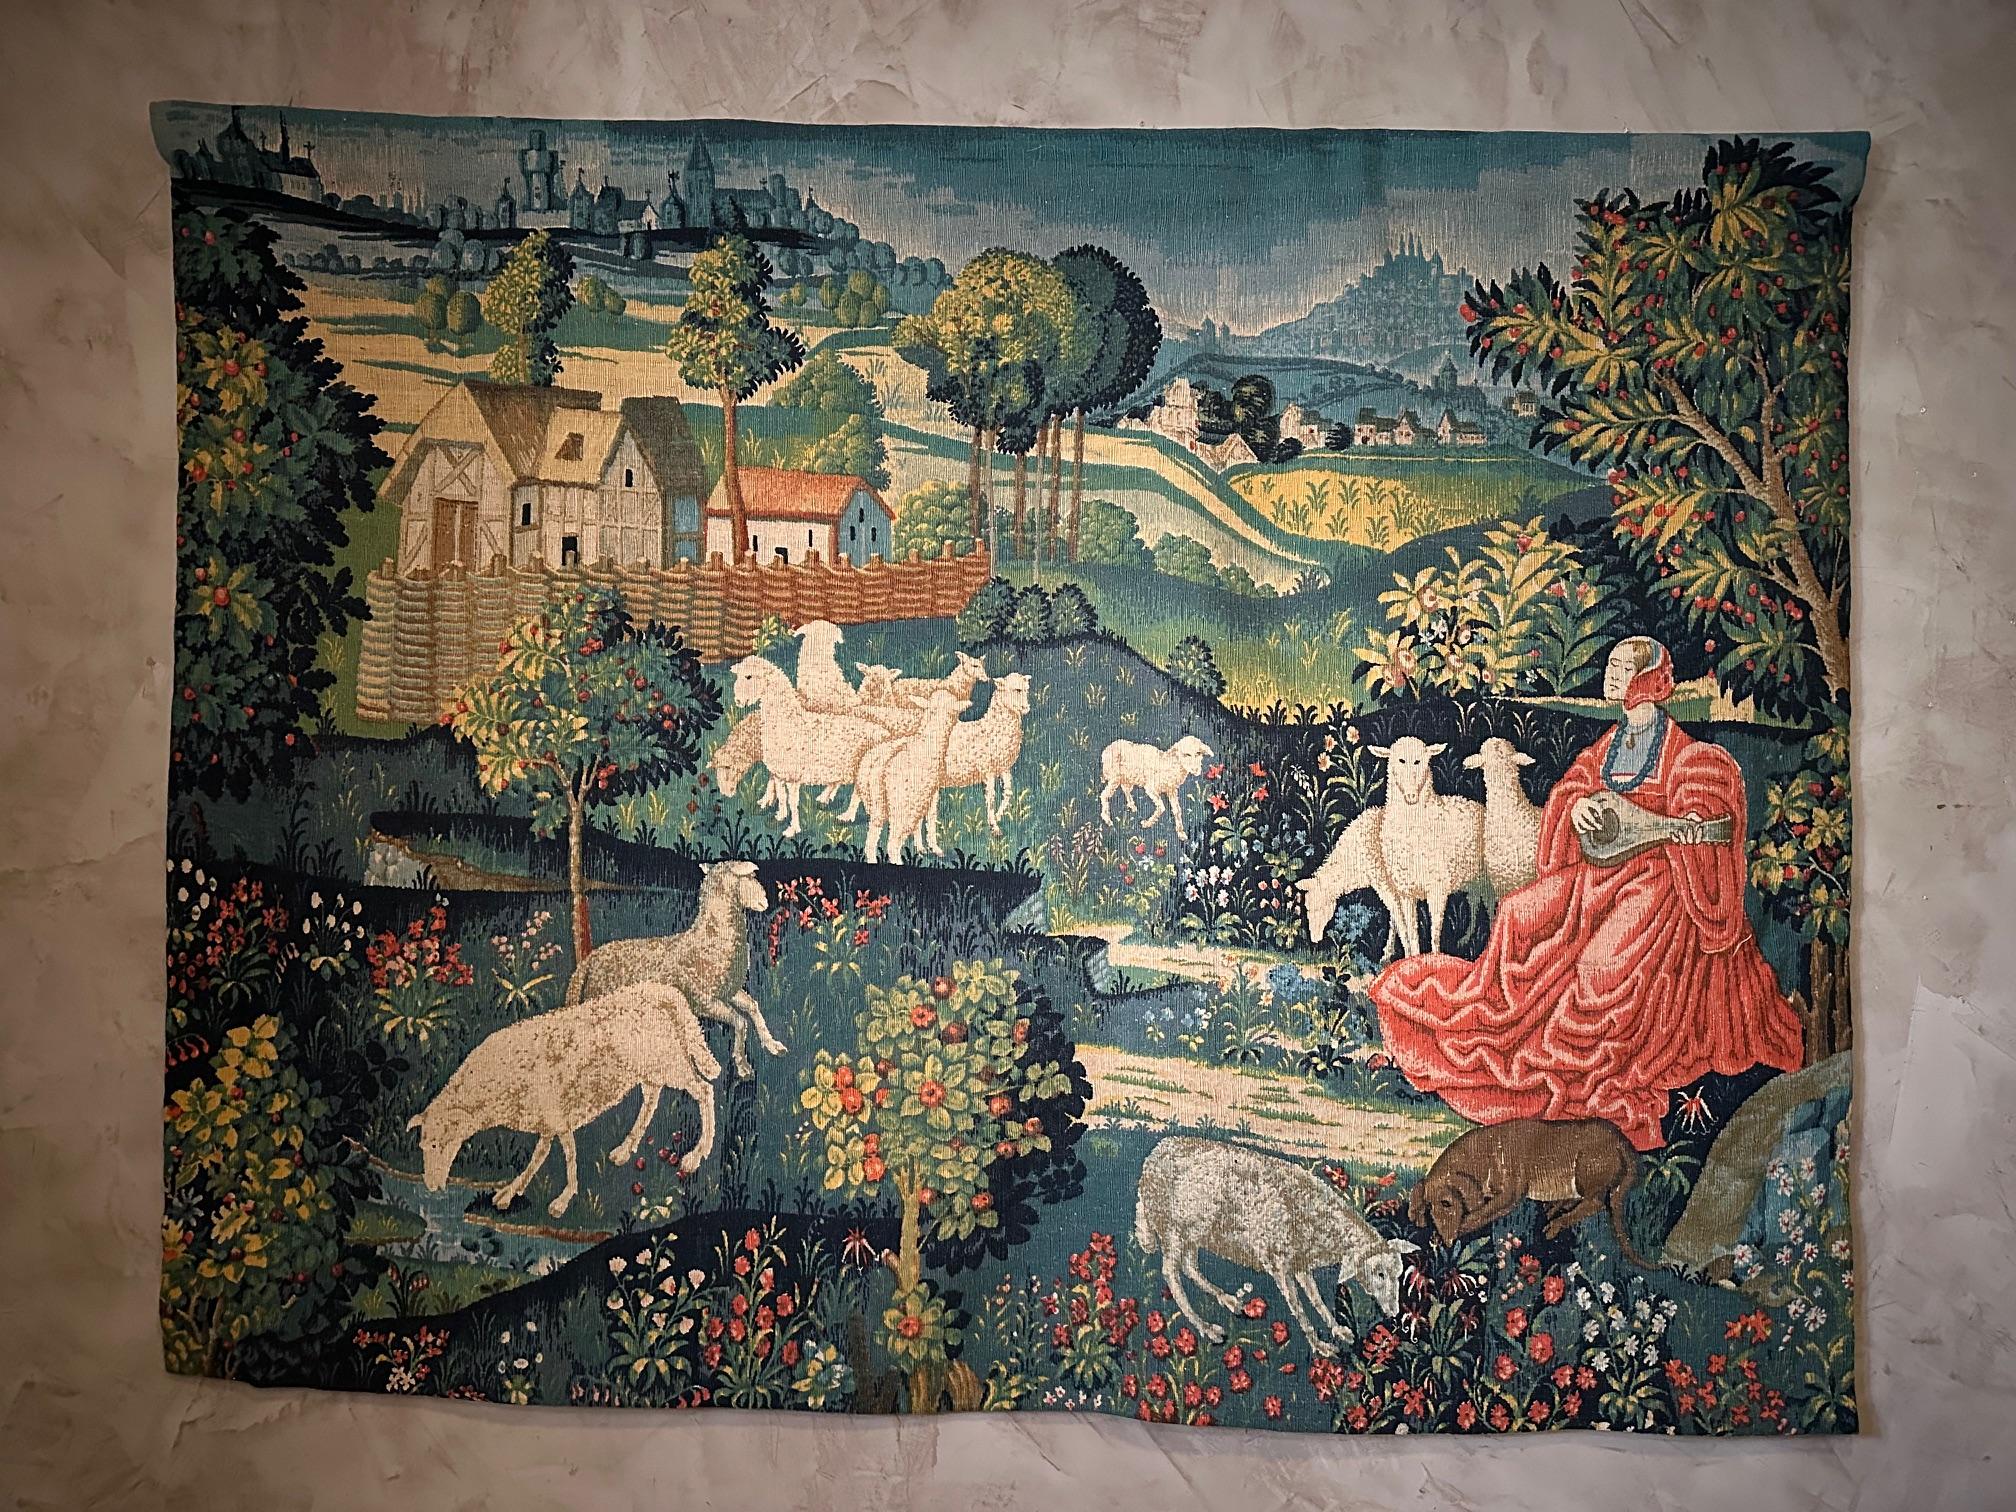 Very beautiful Aubusson style tapestry from the 1950s in very good condition.
Theme: Country Concert
Faithful replica based on a 15th century document.
Vintage texture, wool and linen, hand printed with wool heart.
Fallen career: No. 189
Robert Four